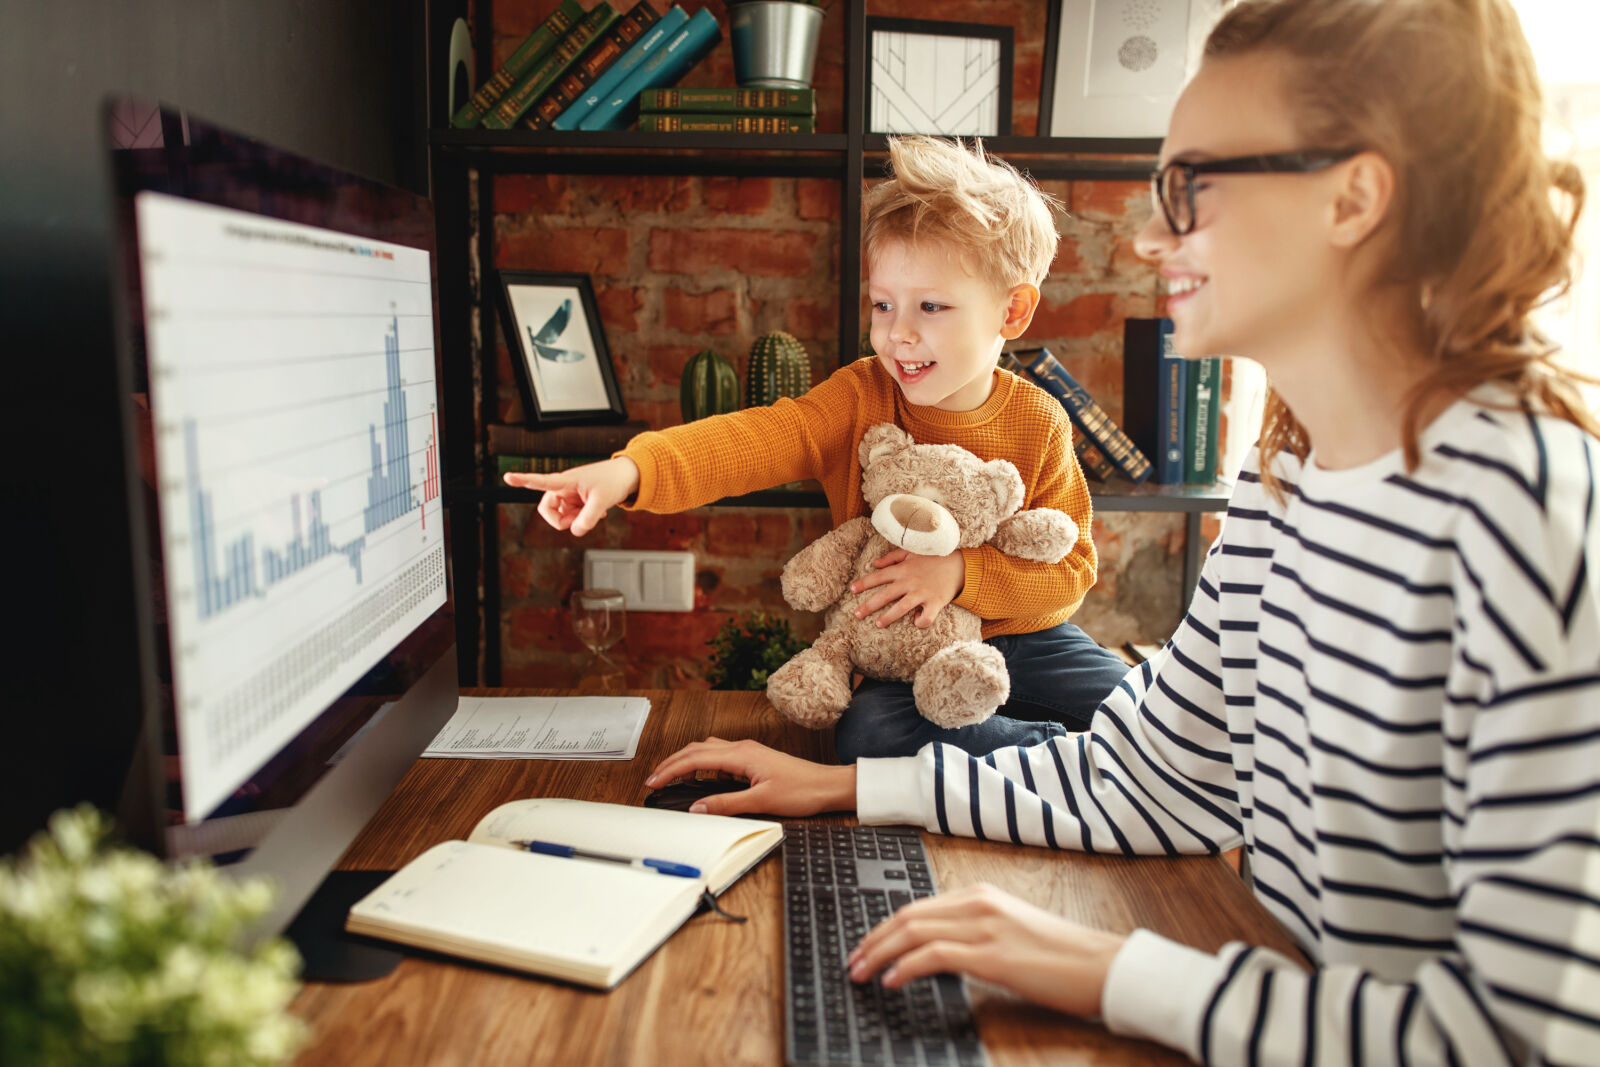 child with stuffed animal pointing at woman's computer screen